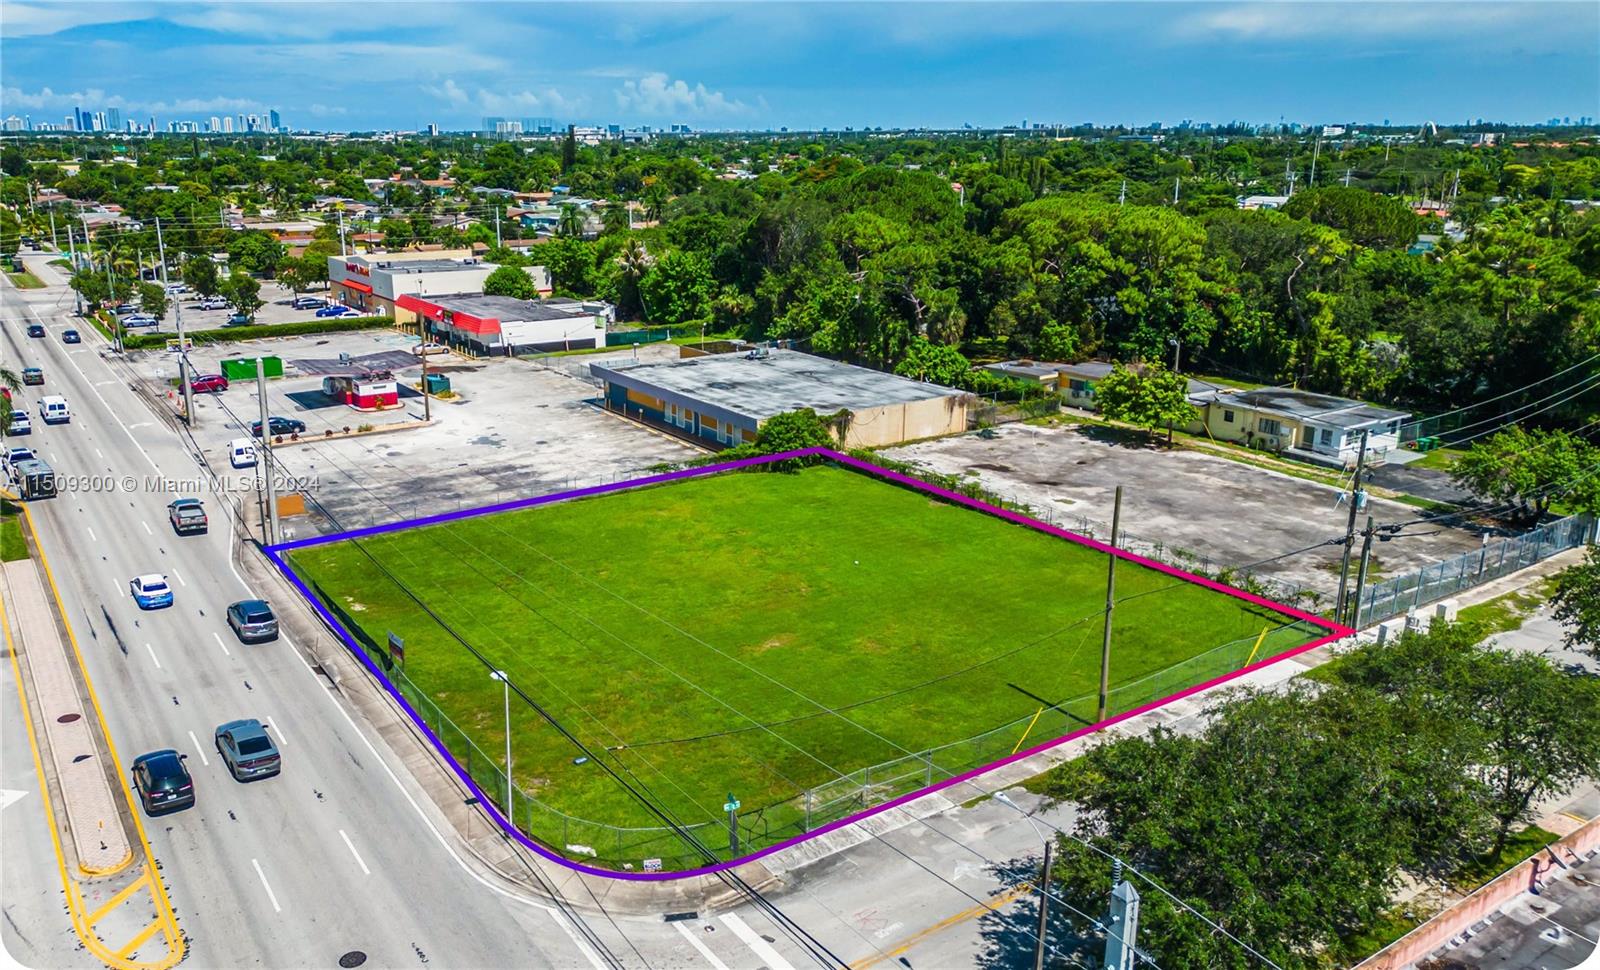 1798 NW 183rd St, Miami Gardens, Florida 33056, ,Land,For Sale,1798 NW 183rd St,A11509300